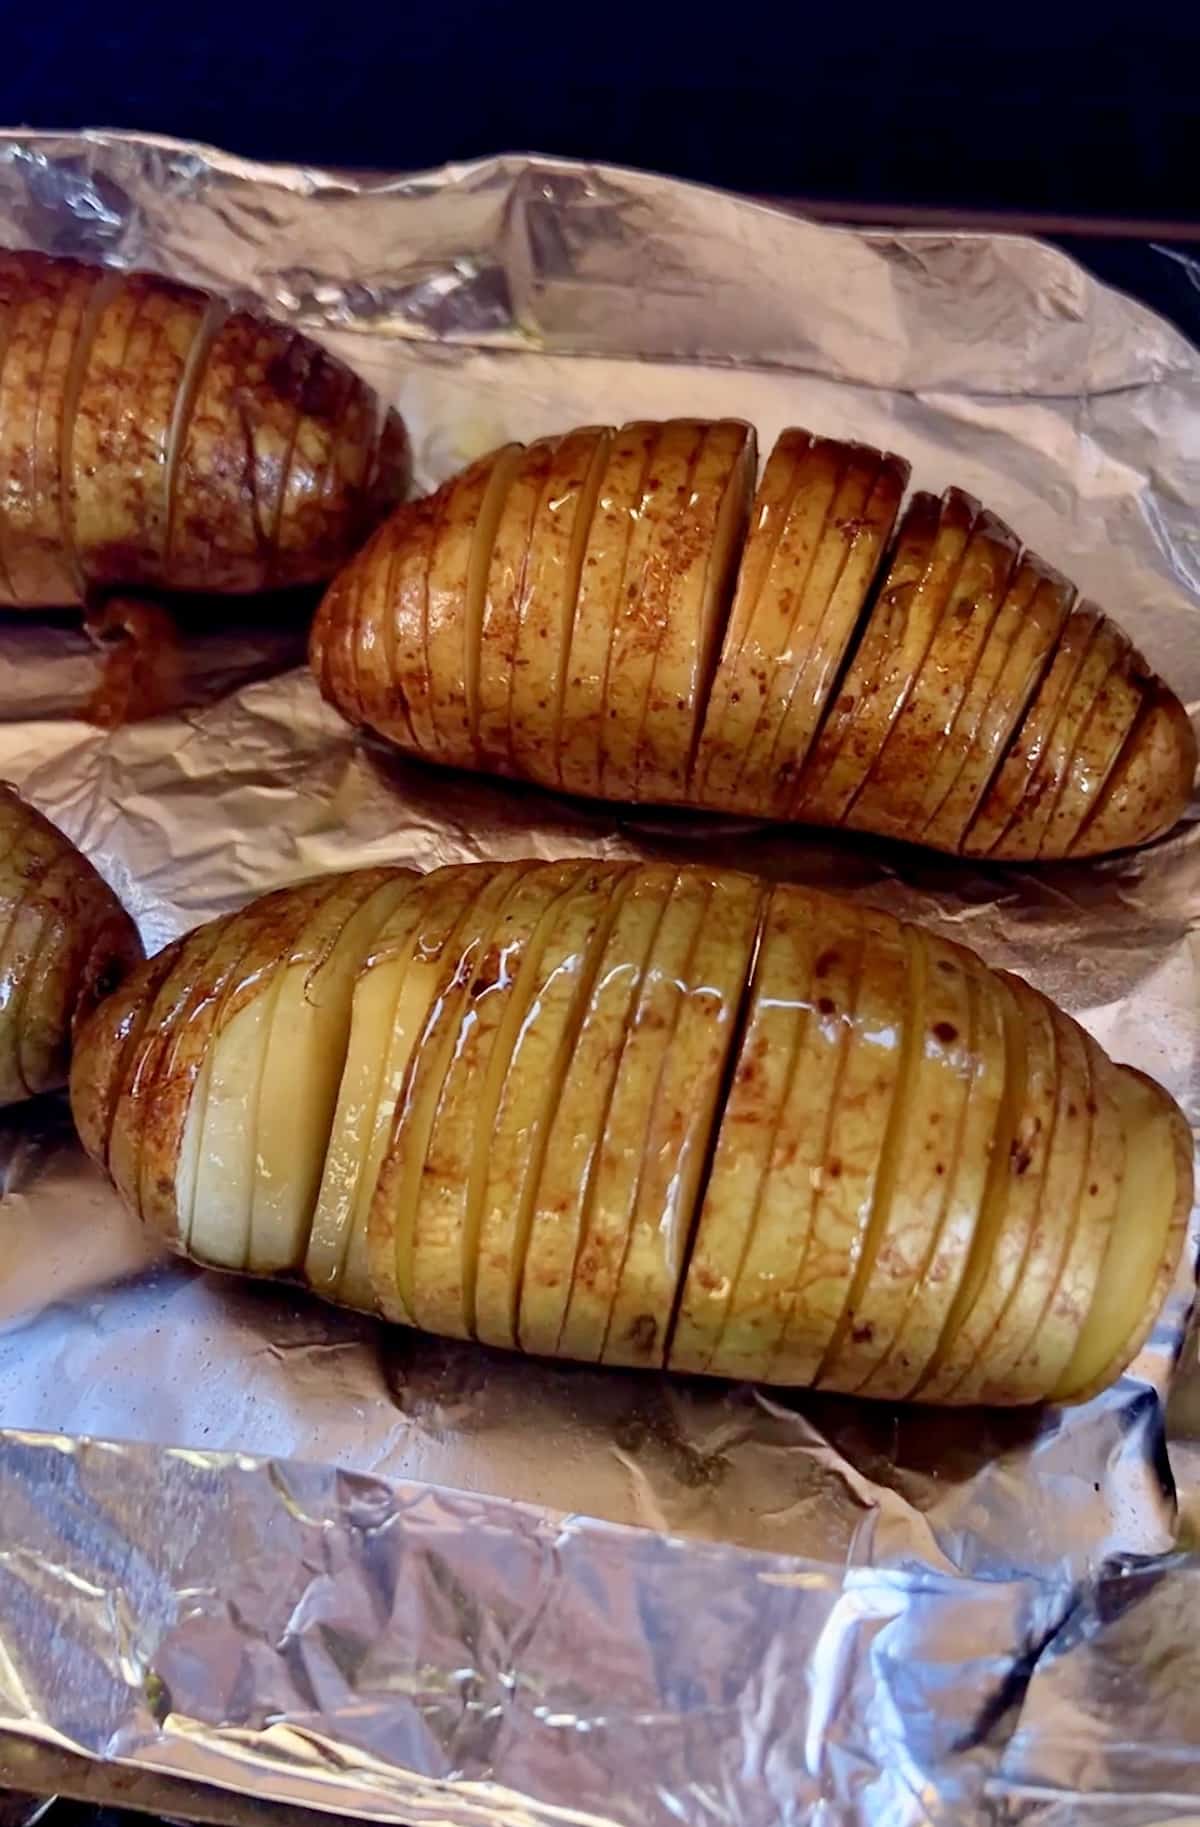 Hasselback potatoes cooking on a pellet grill.